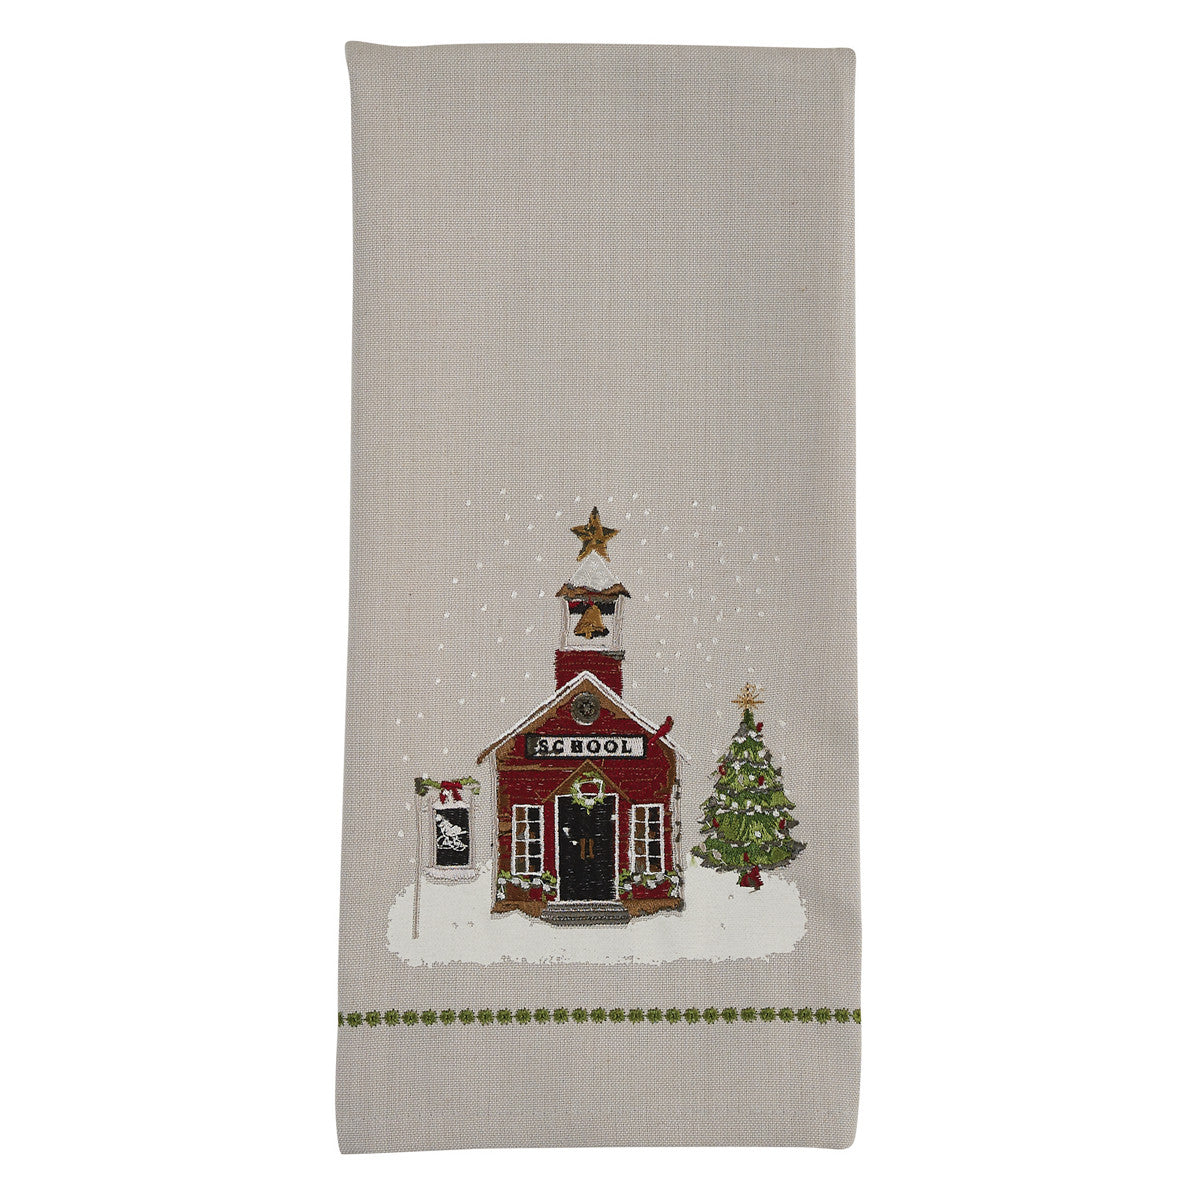 SCHOOL HOUSE PRINTED AND EMBROIDERED DISHTOWEL